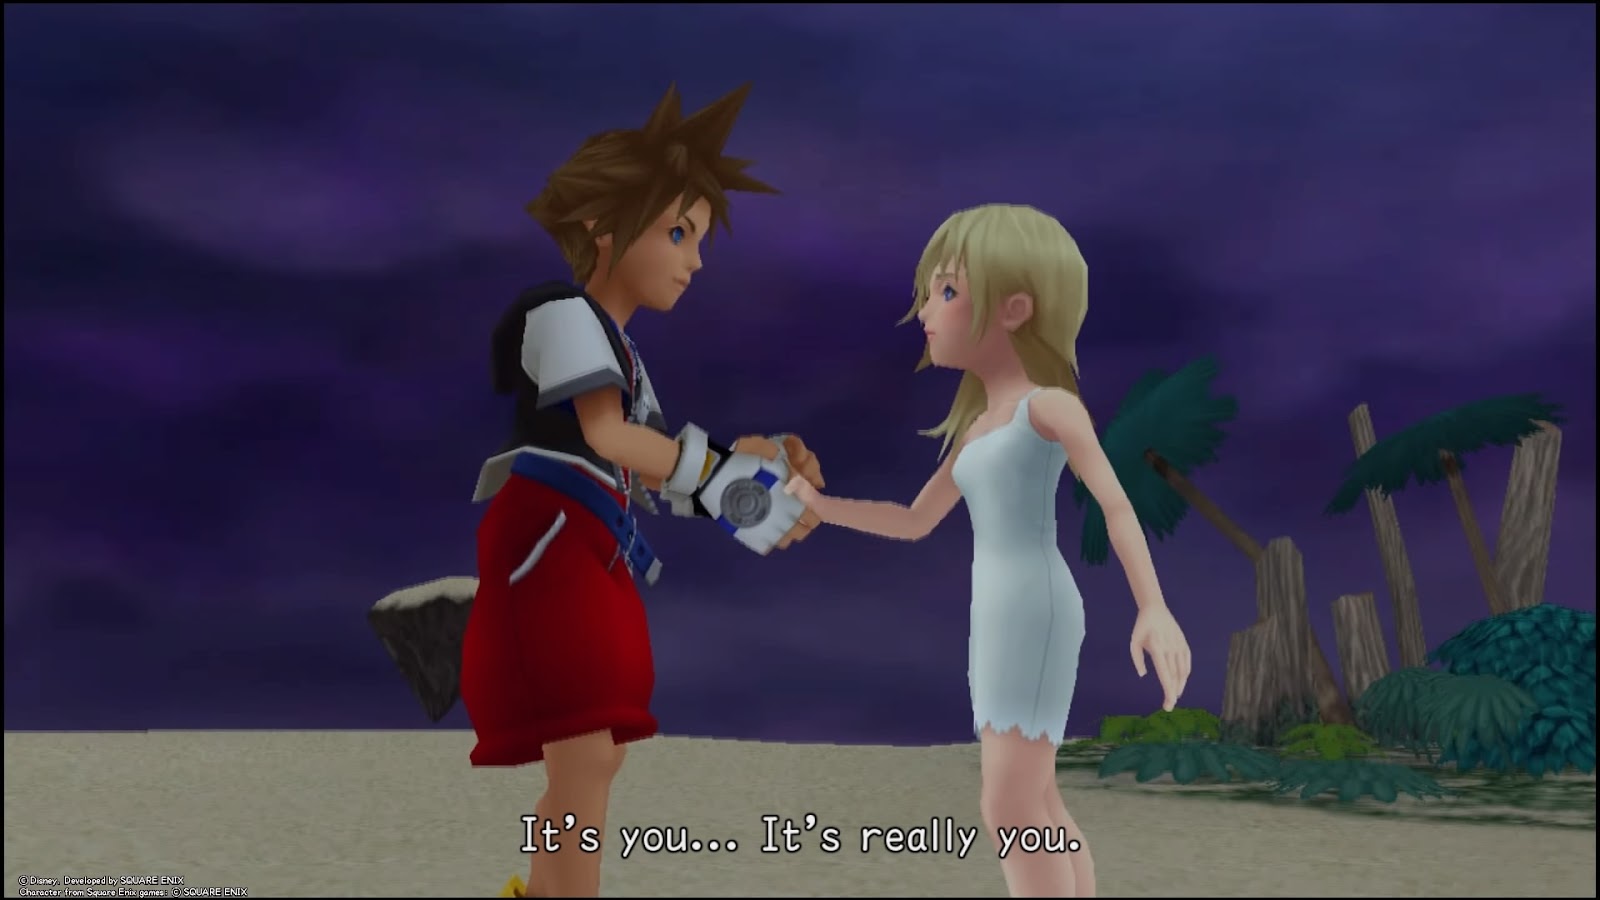 Meeting Naminé after defeating Darkside | Kingdom Hearts Re:Chain of Memories